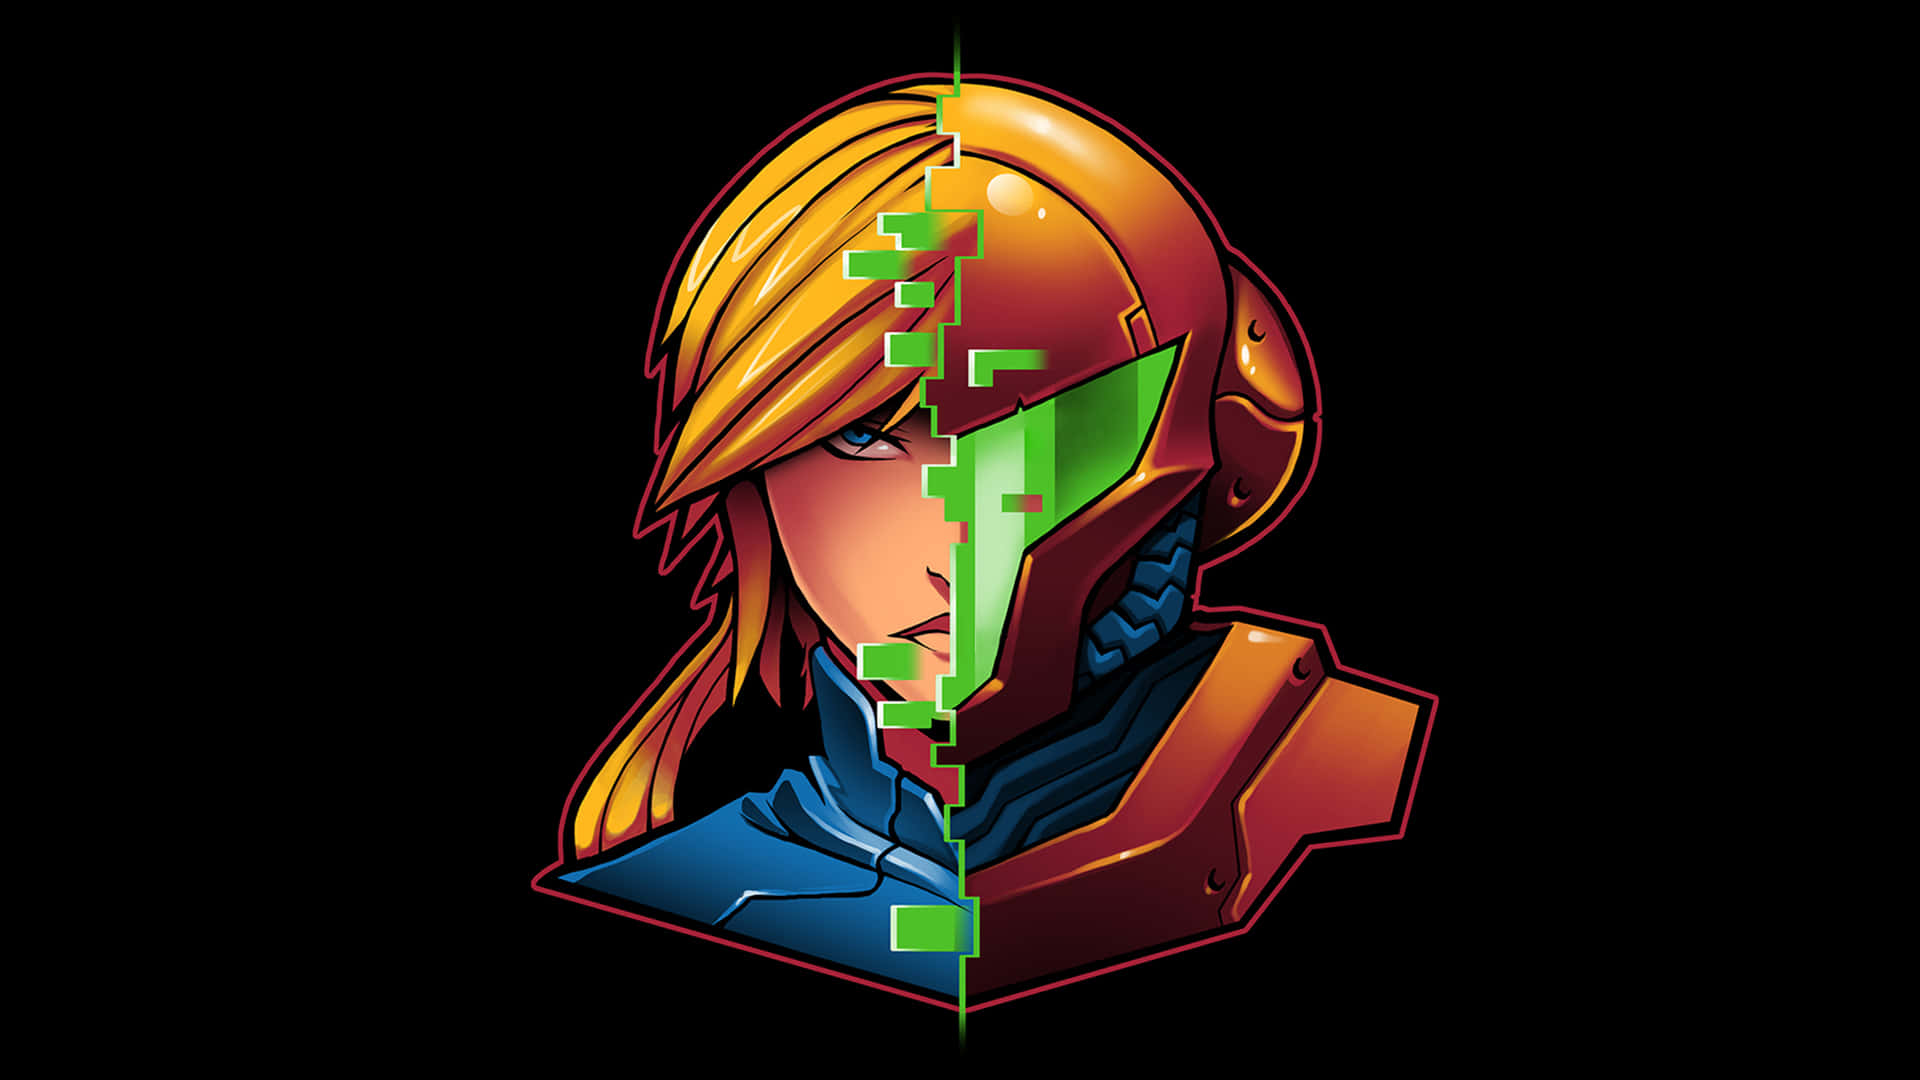 Join Zero Suit Samus In Her Mission To Take Down The Space Pirates Background